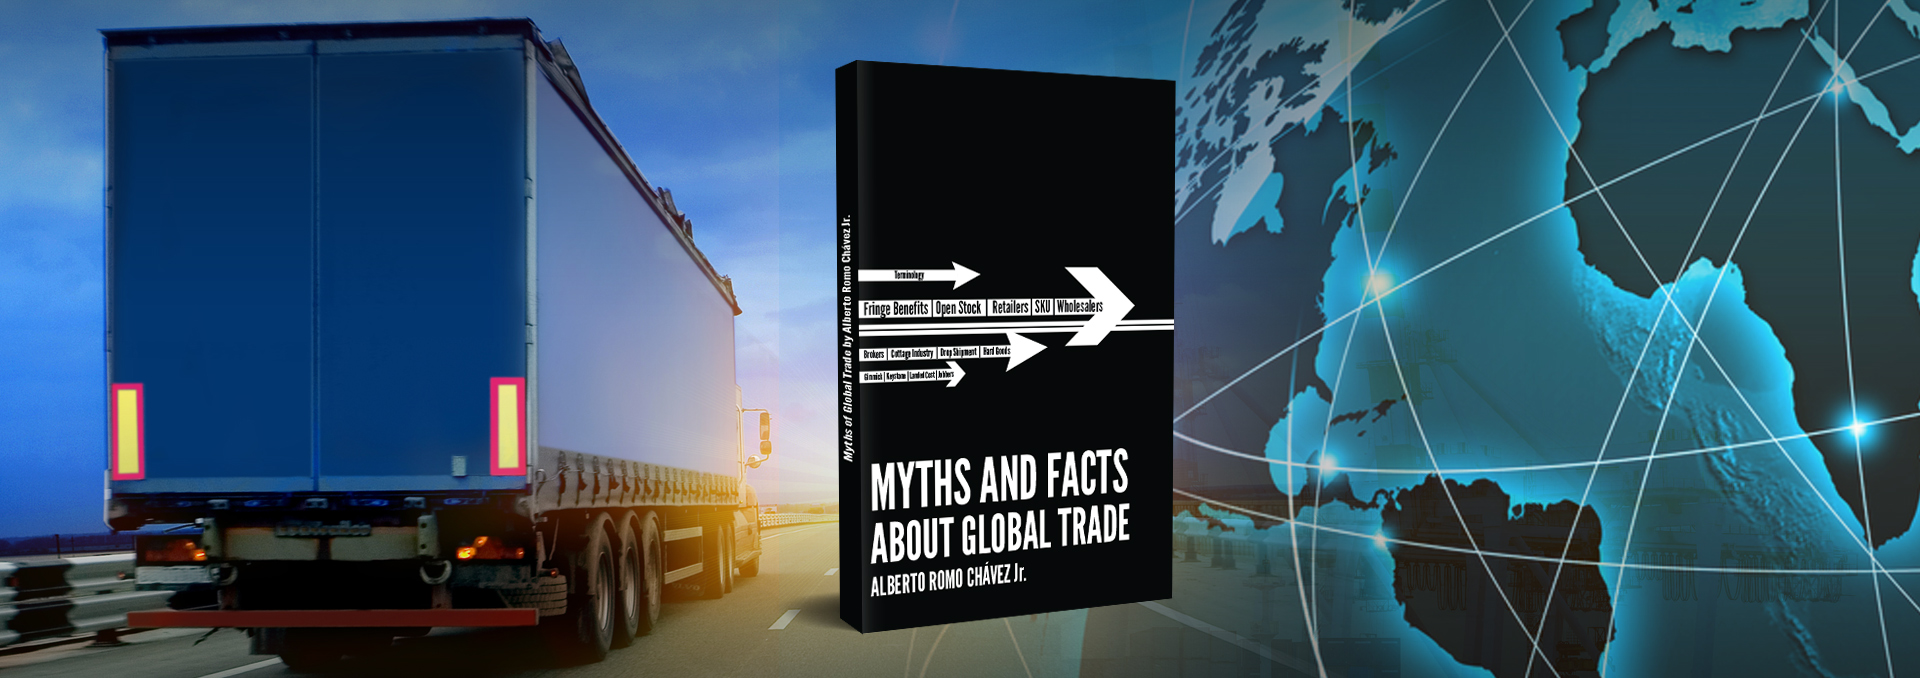 Myths and facts about global trade